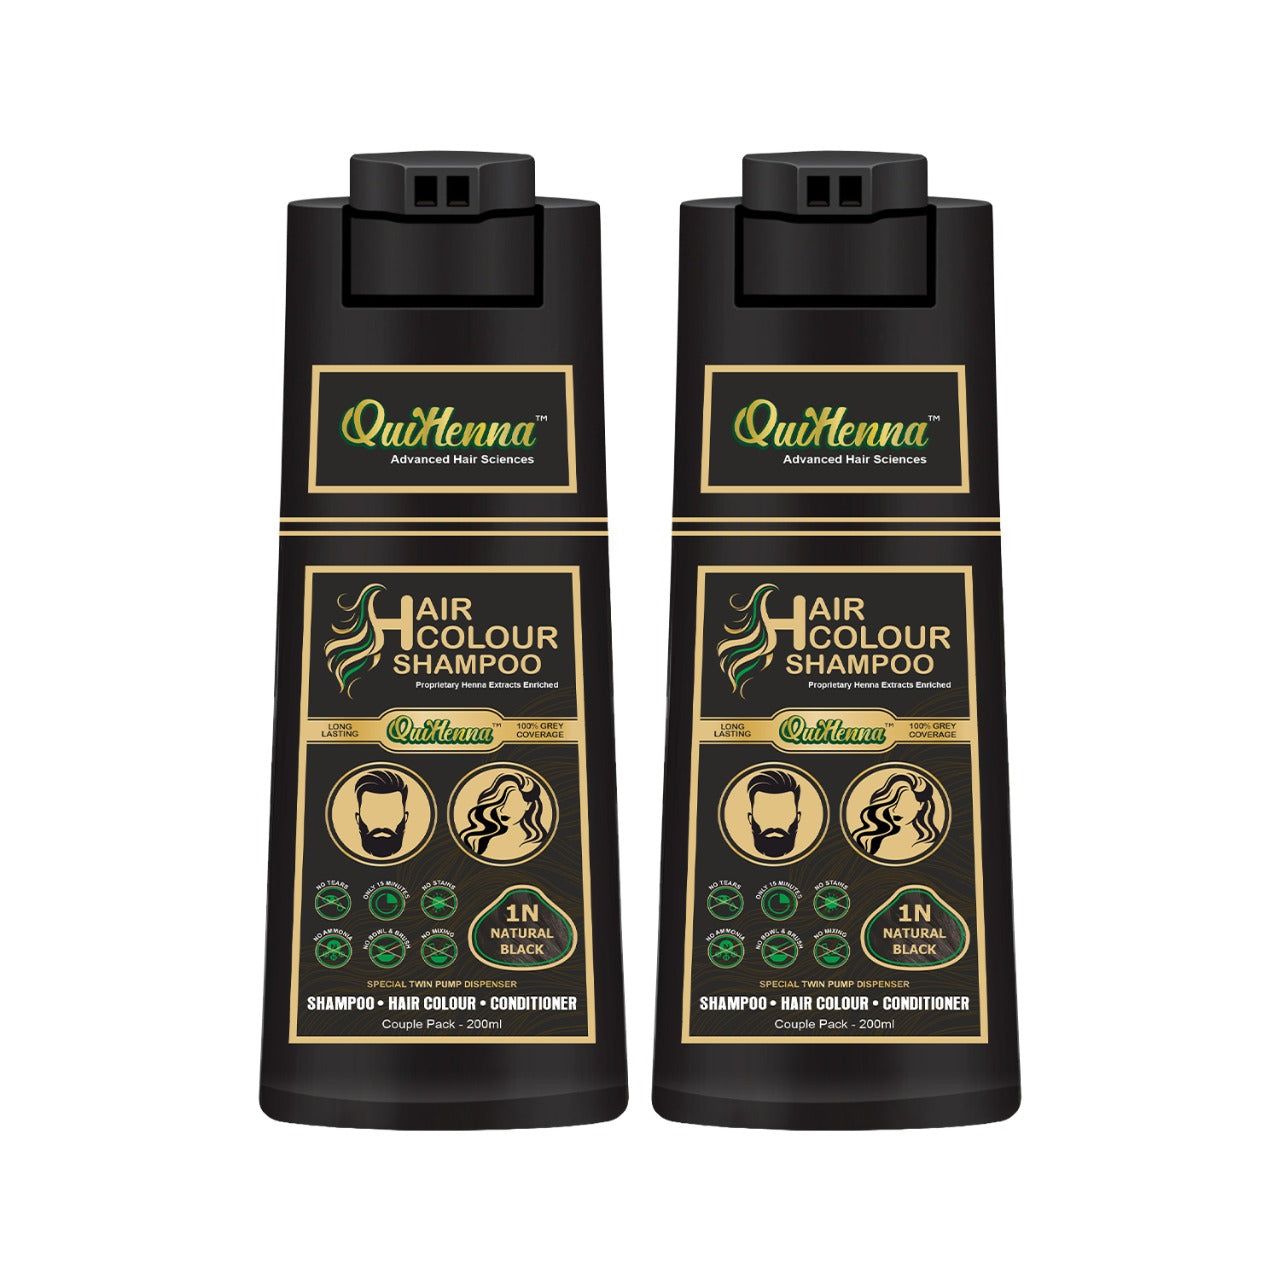 QuikHenna Ammonia Free Hair Colour Shampoo For Men and Women natural black pack of 2